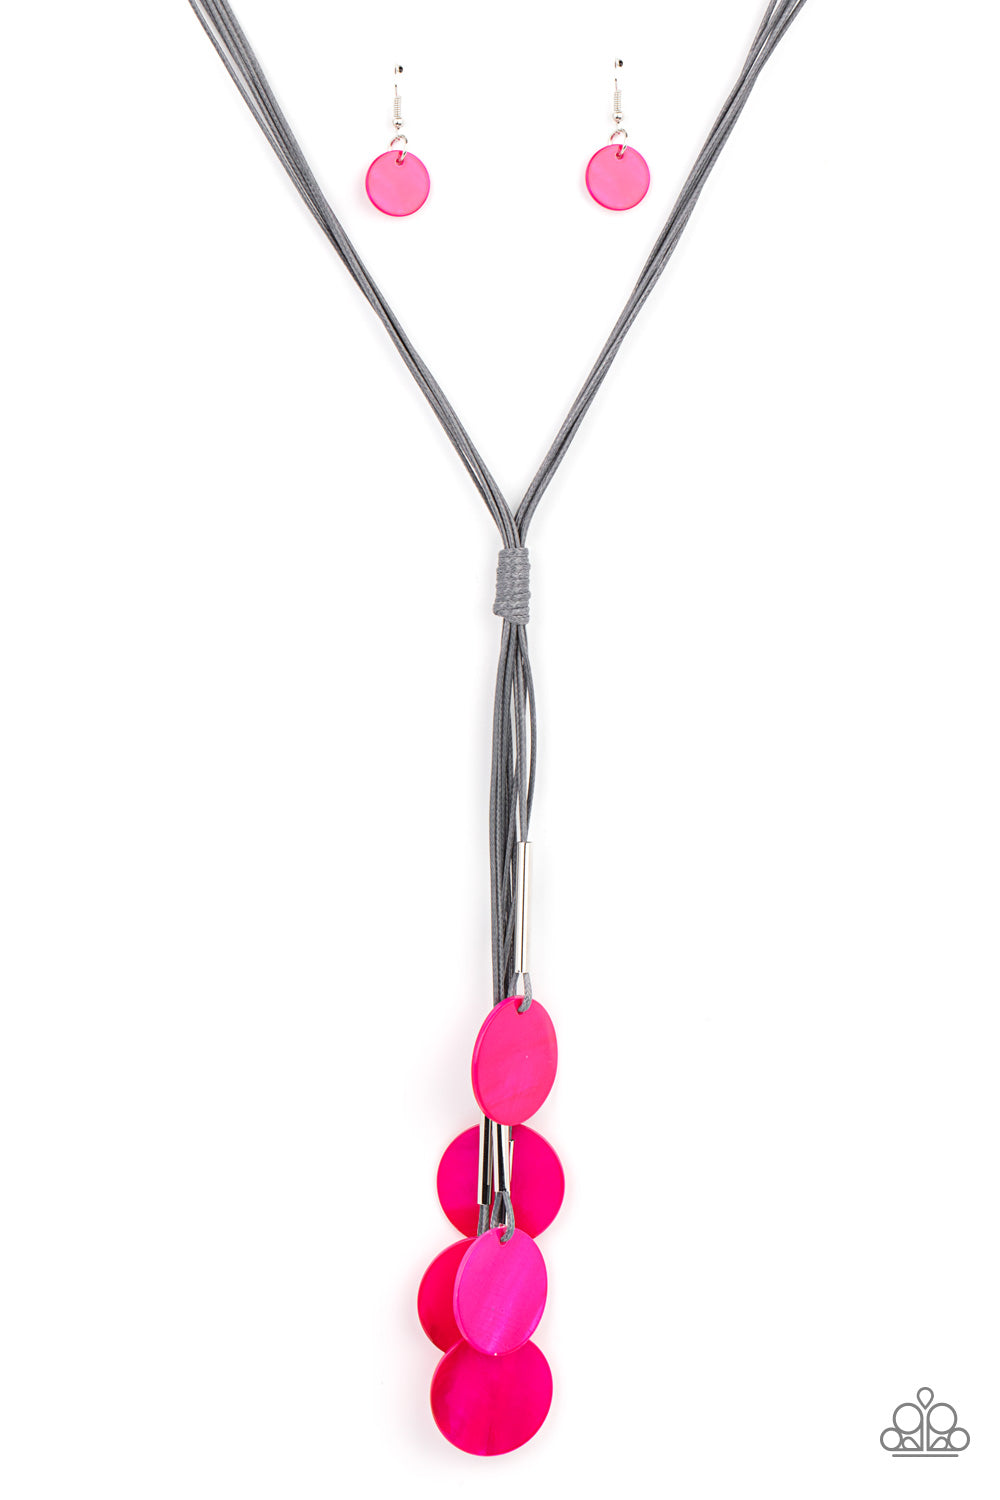 Paparazzi Accessories Tidal Tassels - Pink Necklaces - Lady T Accessories